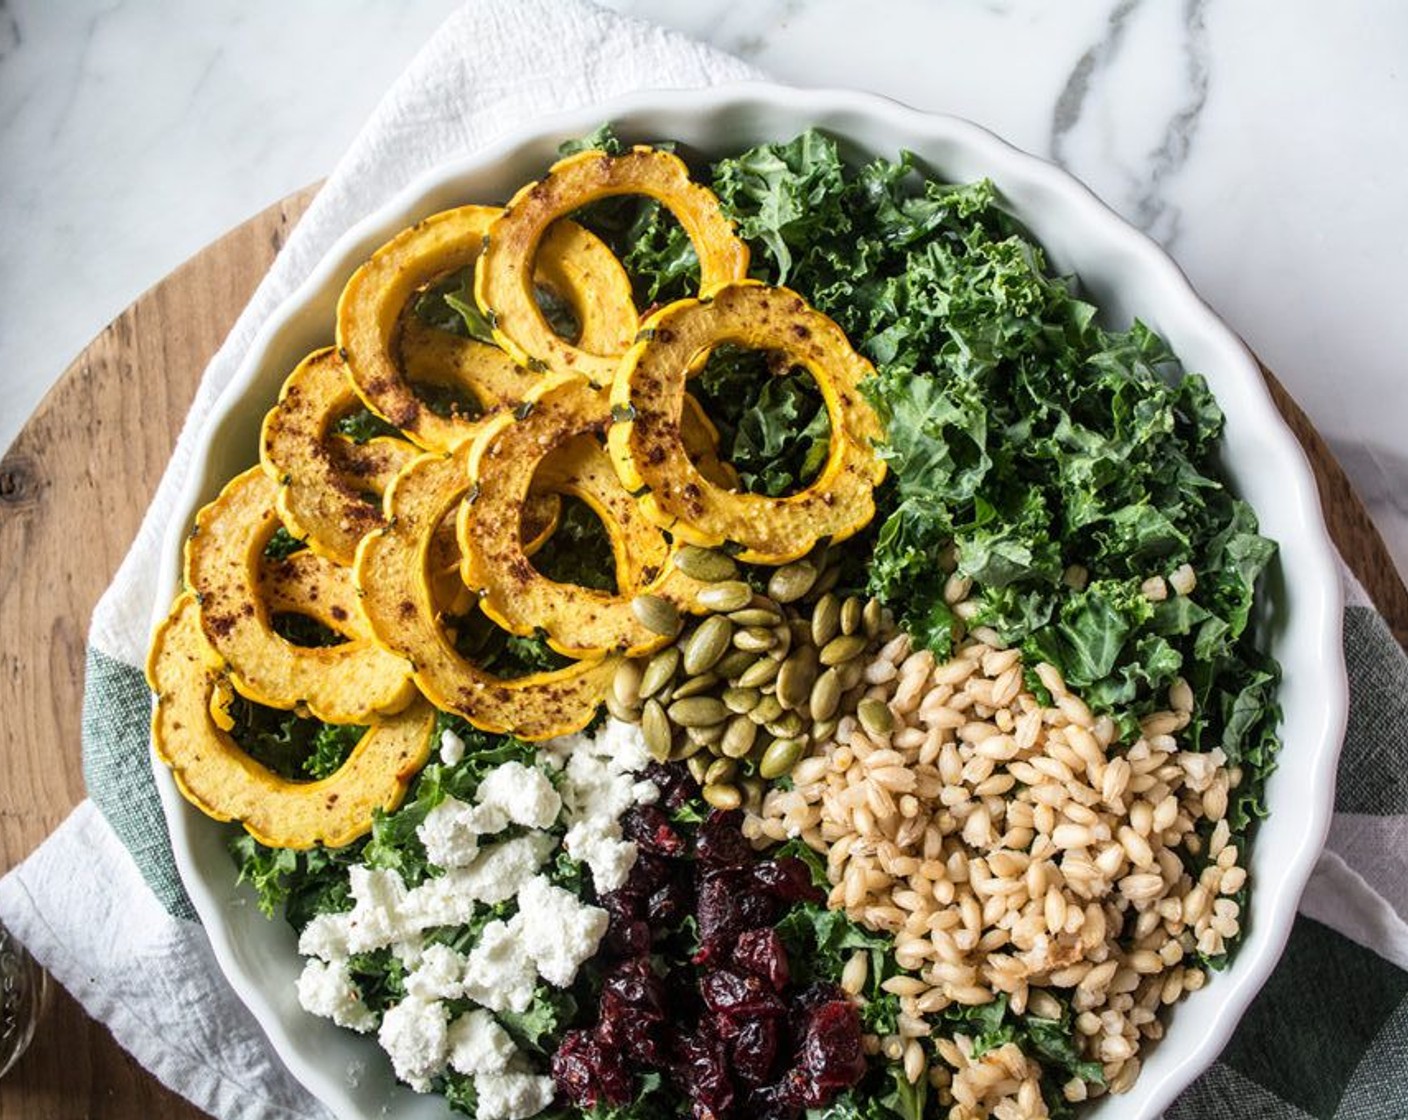 step 7 To assemble the salad, divide Kale (5 cups) between two large bowls or plates, then top each with roasted delicata squash, barley, Goat Cheese (3 Tbsp), Dried Cranberries (1/4 cup) and Pepitas (2 Tbsp).